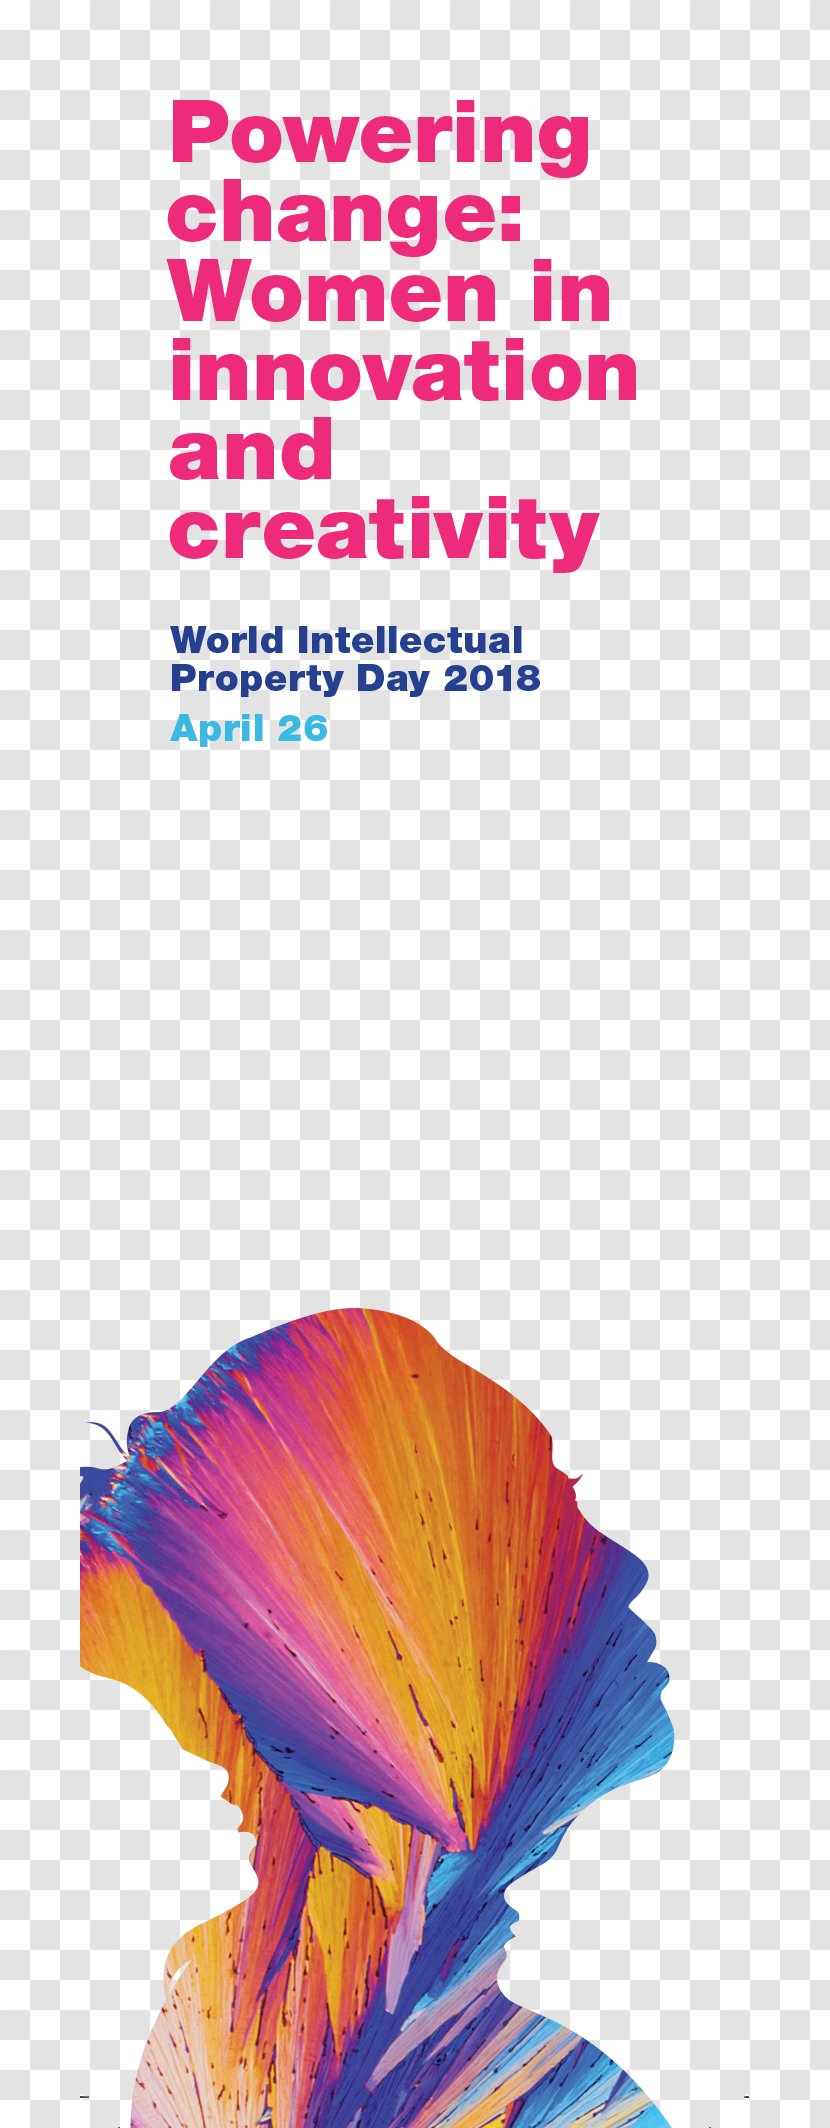 World Intellectual Property Day Organization WIPO Convention Trademark - April 26 Transparent PNG